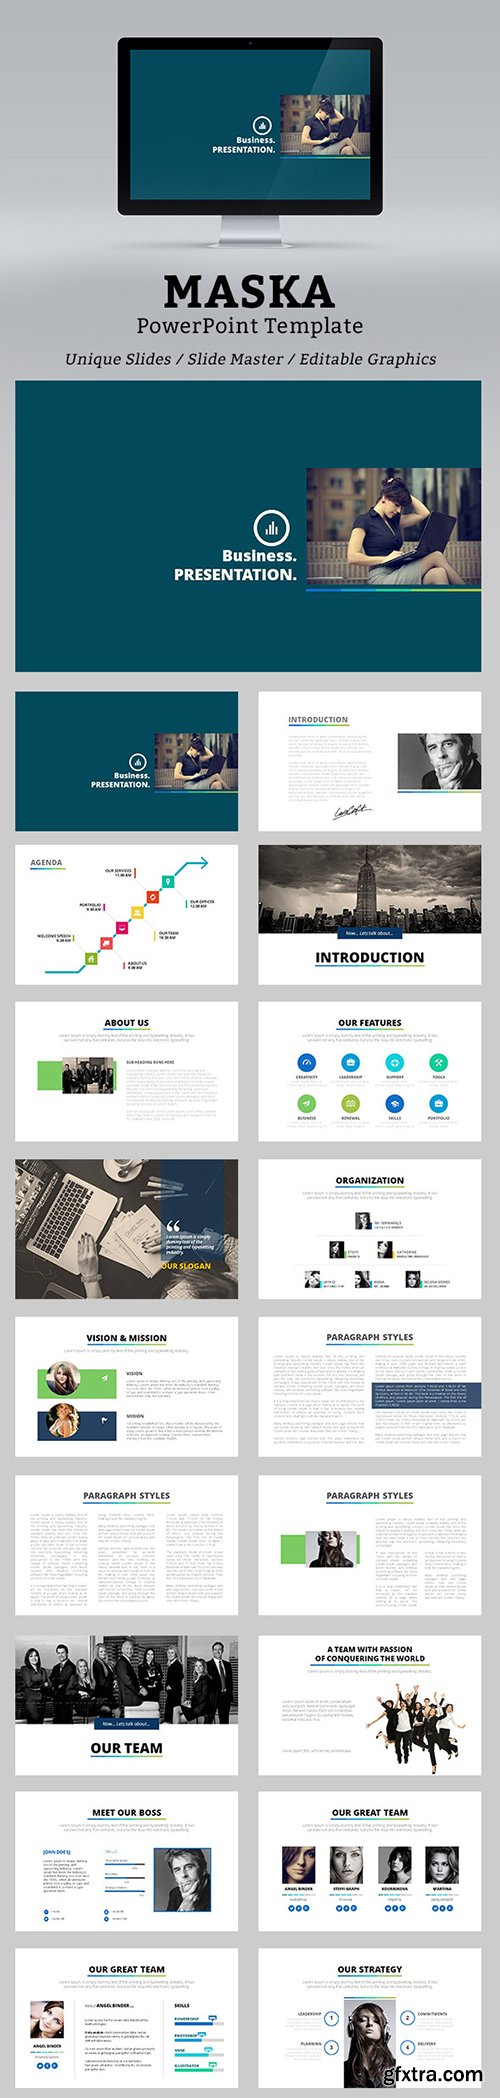 Graphicriver - Maska PowerPoint Template 12957997